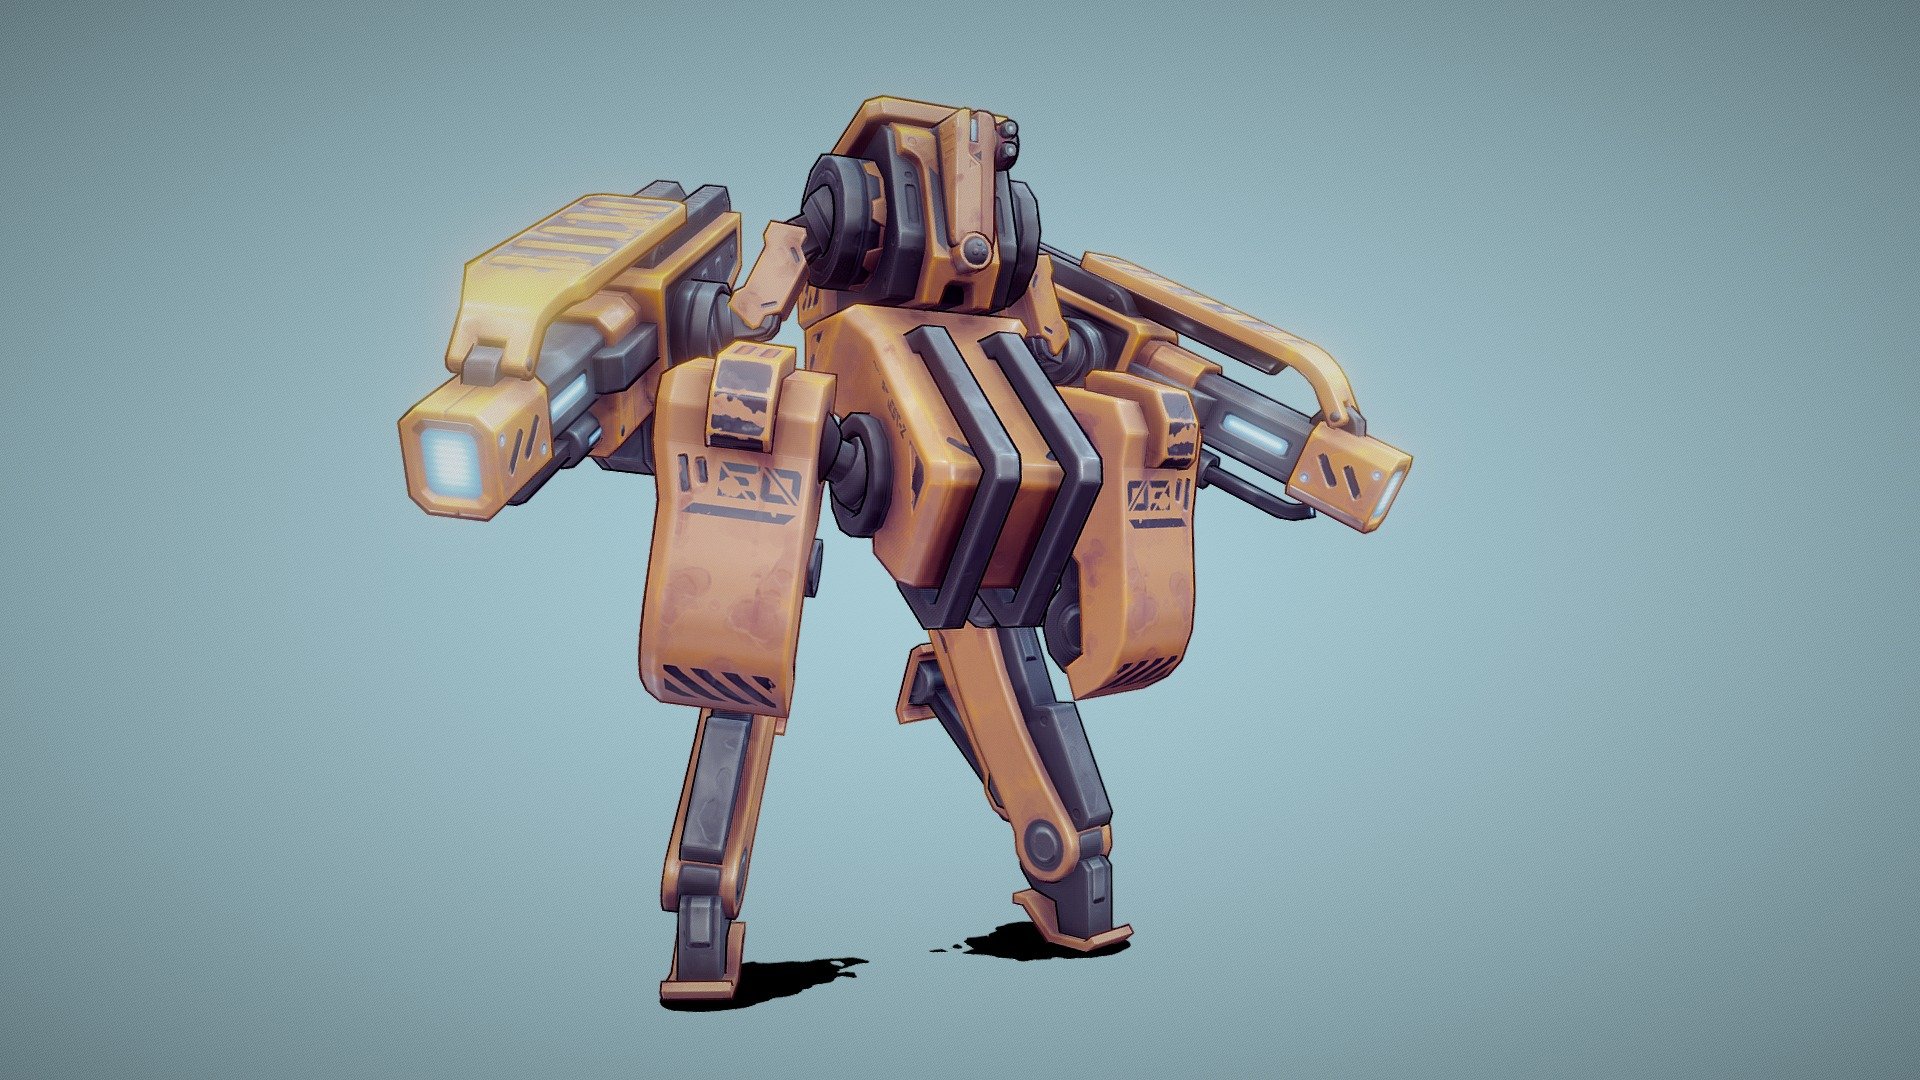 Stylized handpainted pbr mech.

1 texture for body and 1 texture for weapon

Weapons can be changed so they have different texture.

Textures have more light information then they should for pbr but on mobile this way we can turn off normal and roughness so shaders will be less demanding even on lower-end mobile phones.

Mech is intended to be used in upcoming mobile game, still in very early development stage.

Update: Changed &ldquo;head